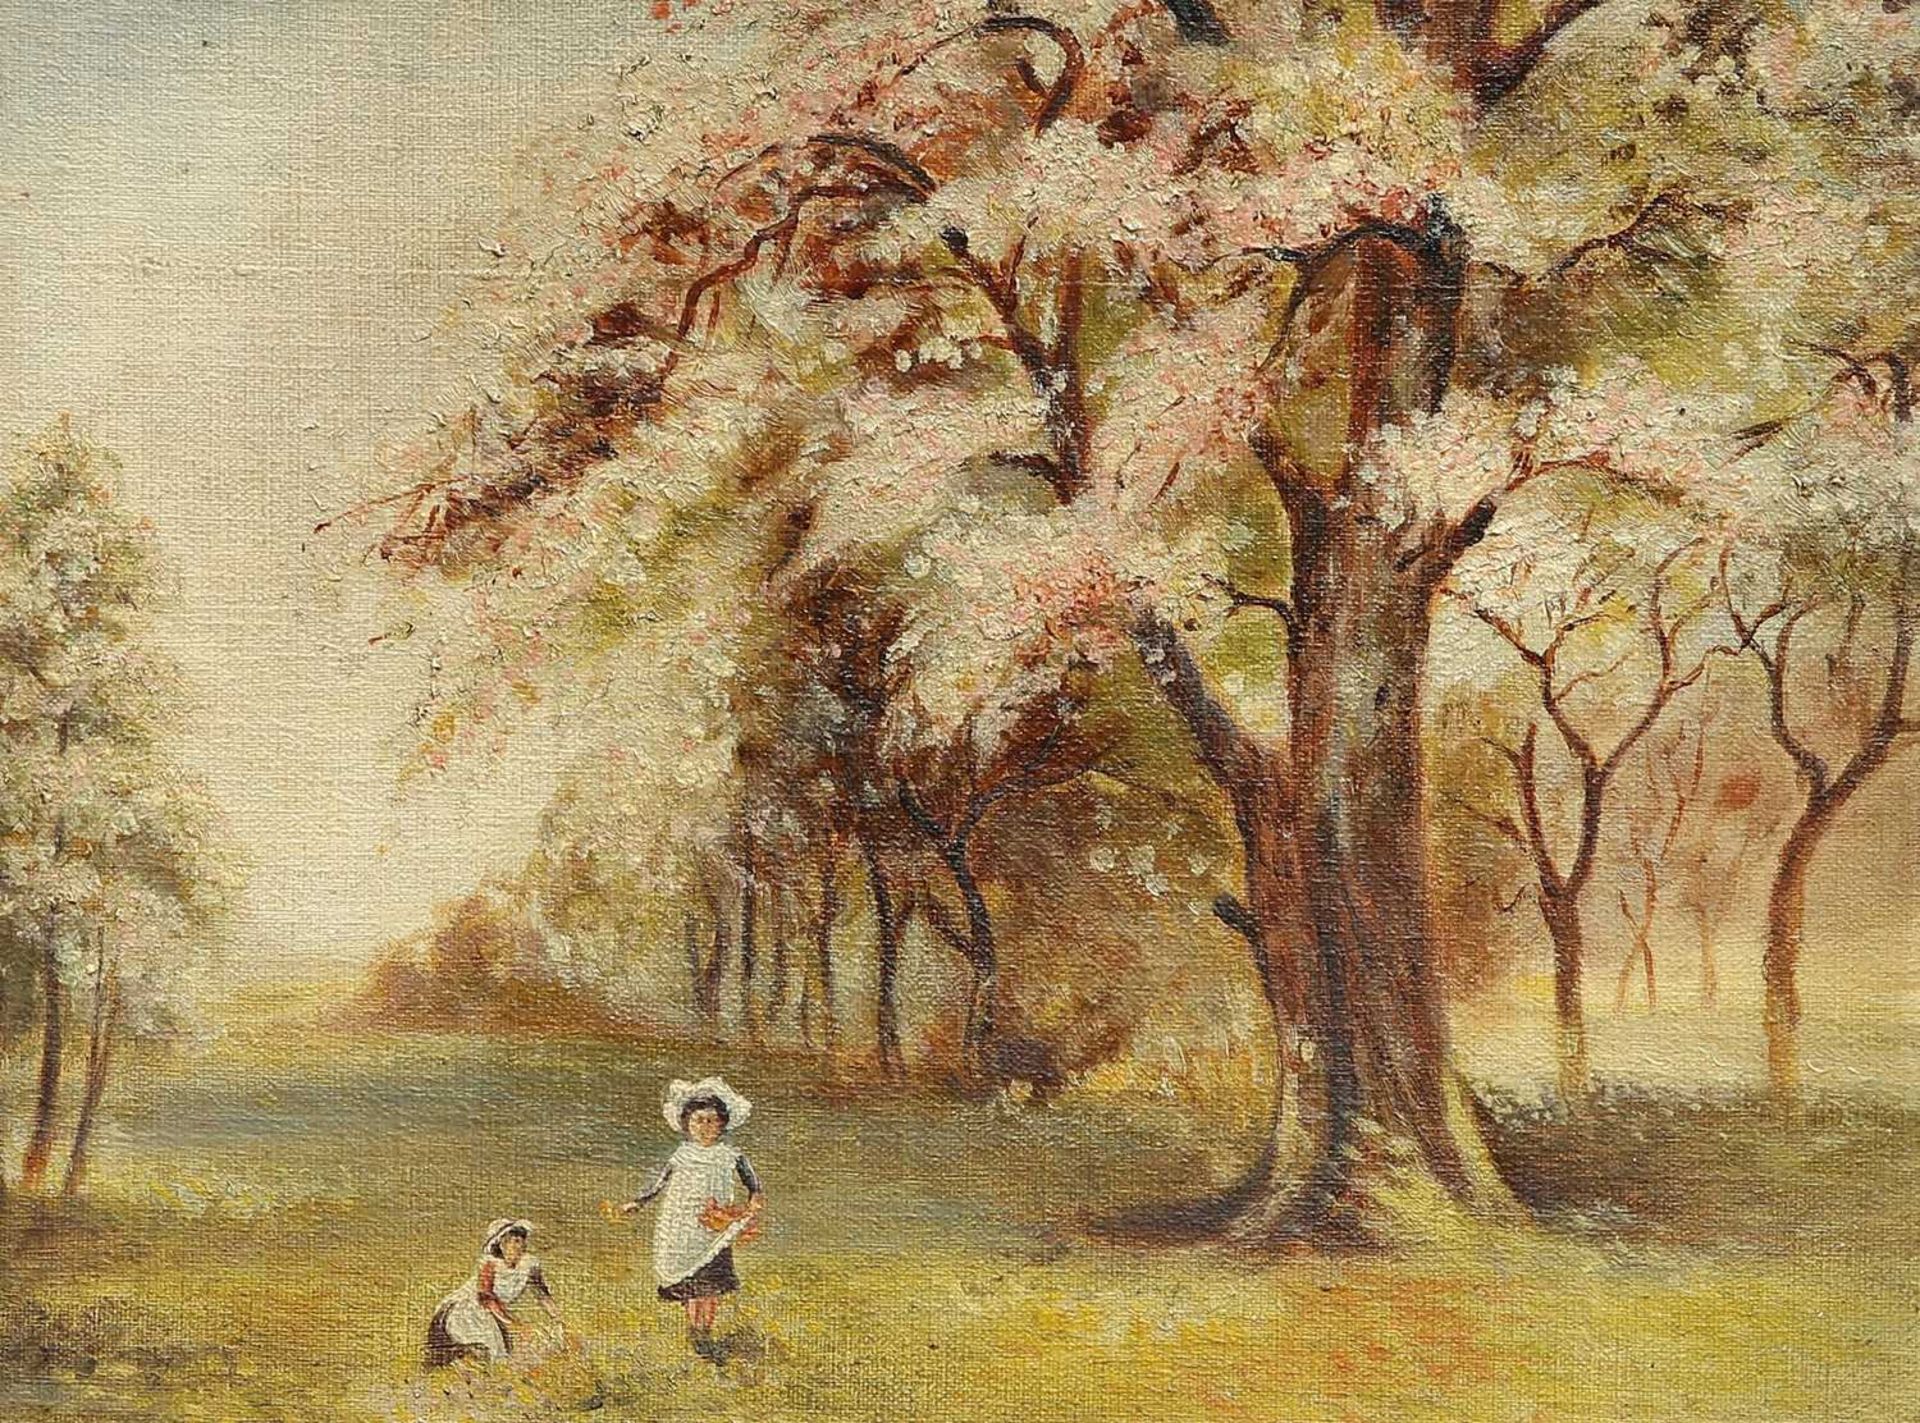 ATTRIBUTED TO A STEAD (19TH CENTURY) AN ORCHARD AT LITTLE BADDOW, CHELSMFORD